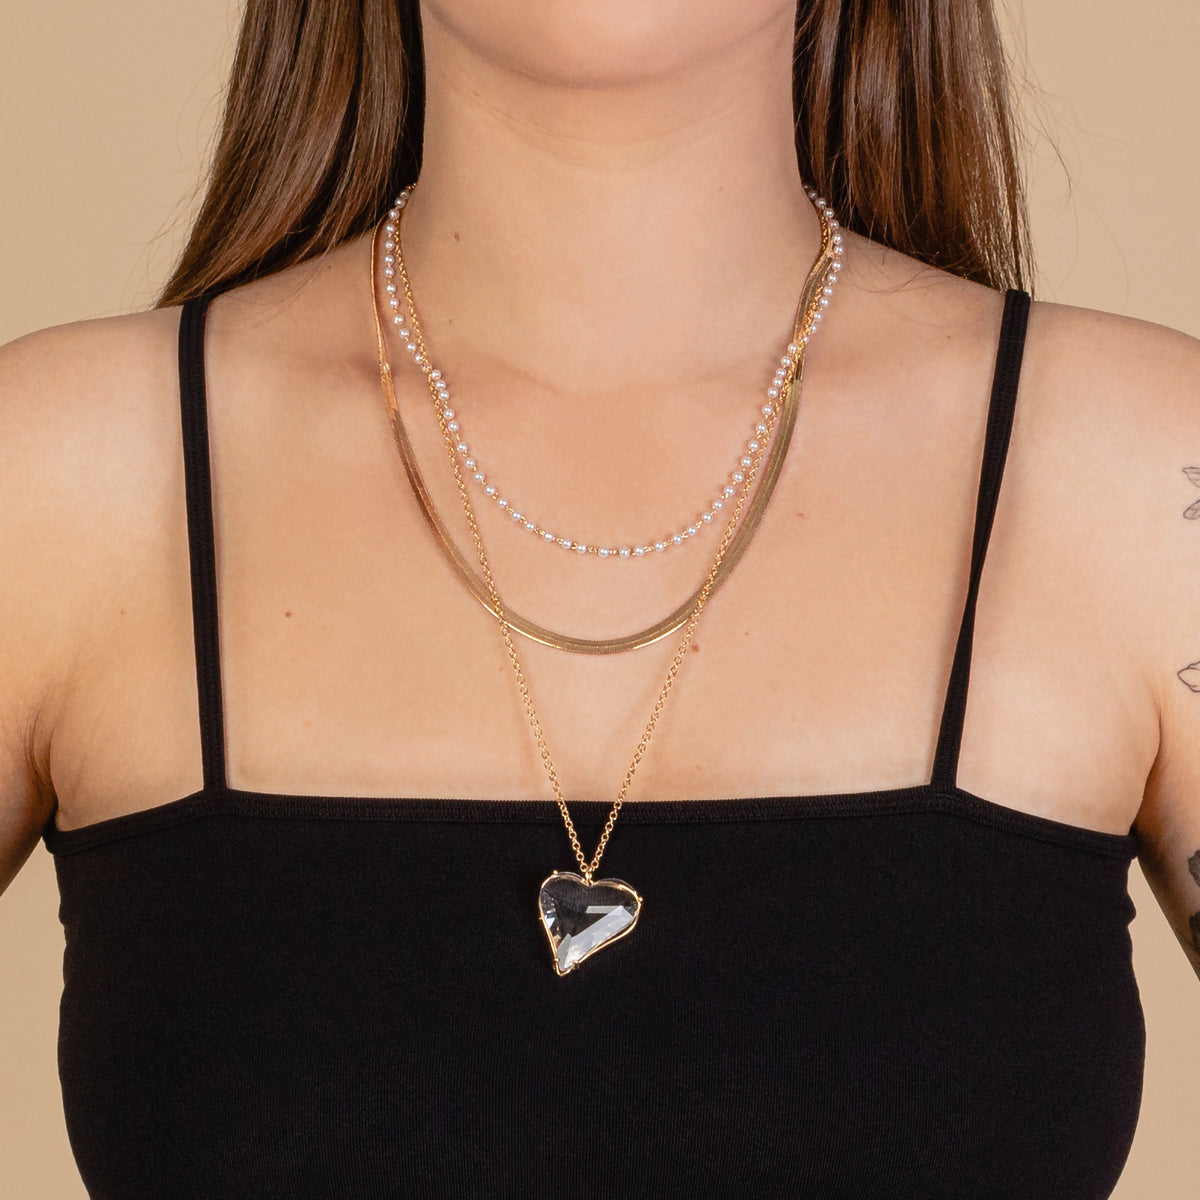 72951 - Dainty Heart Necklace - White